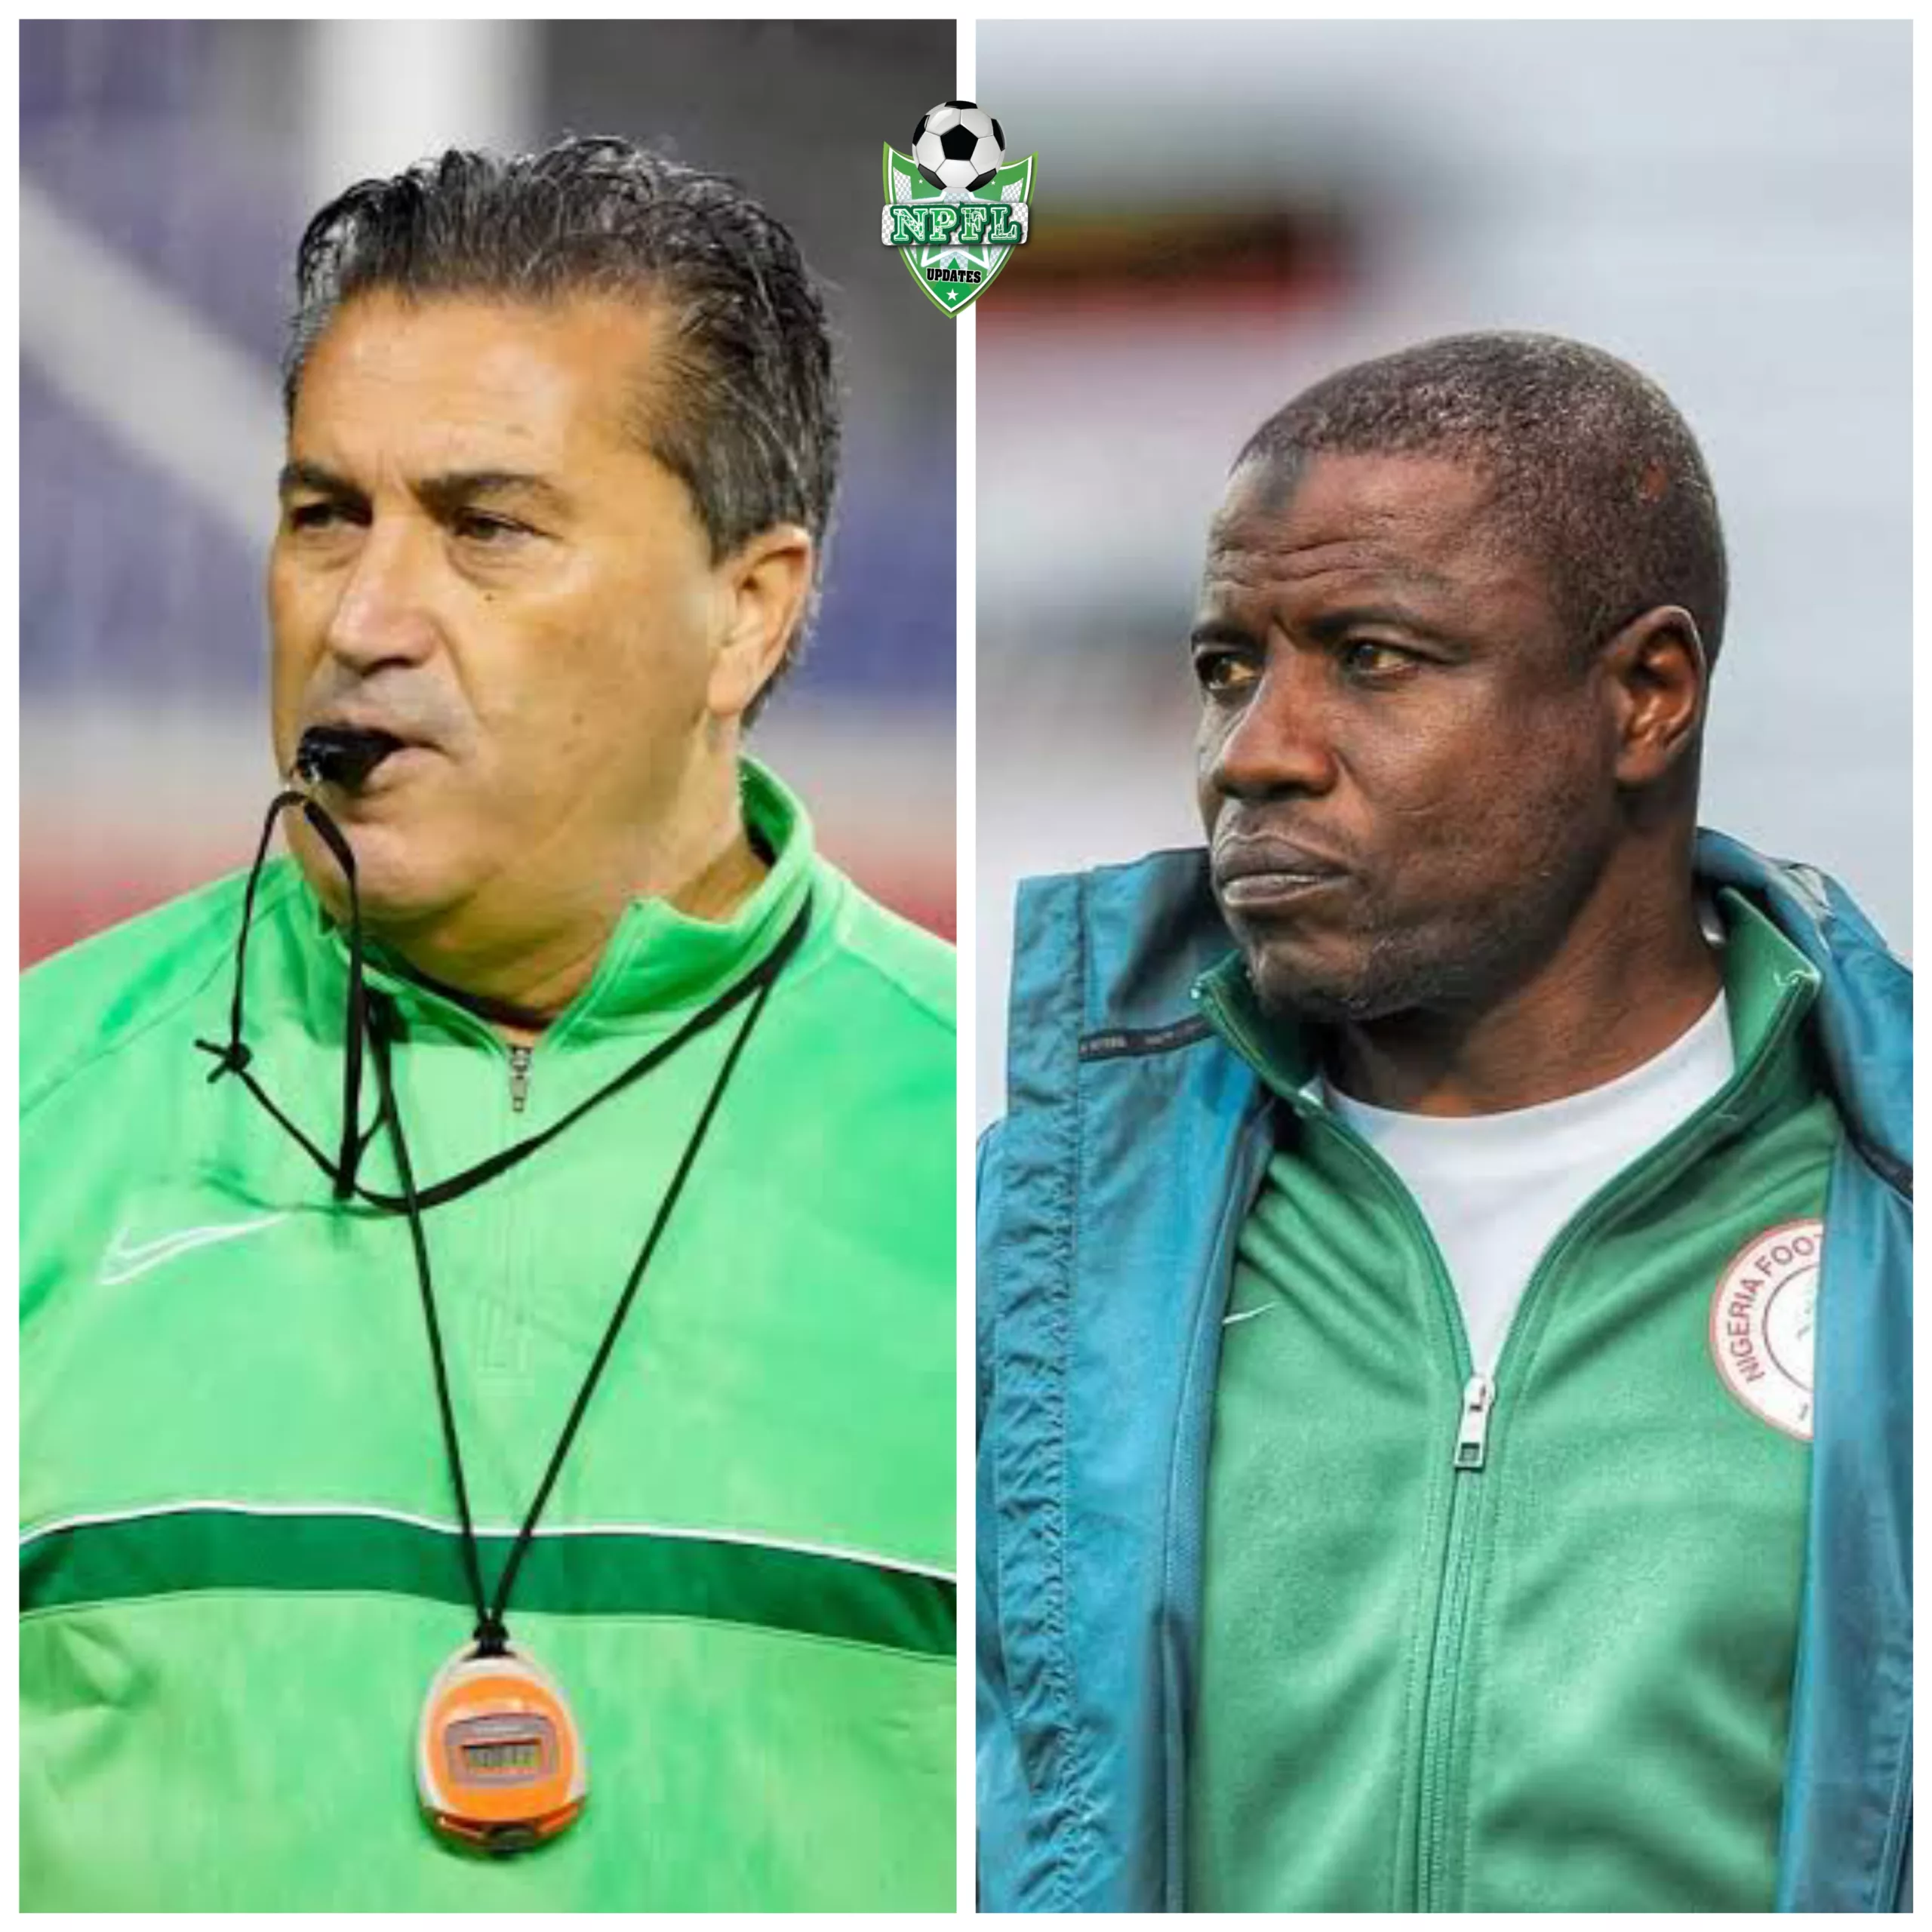 Fans of the Super Eagles want Jose Peseiro out of the national team